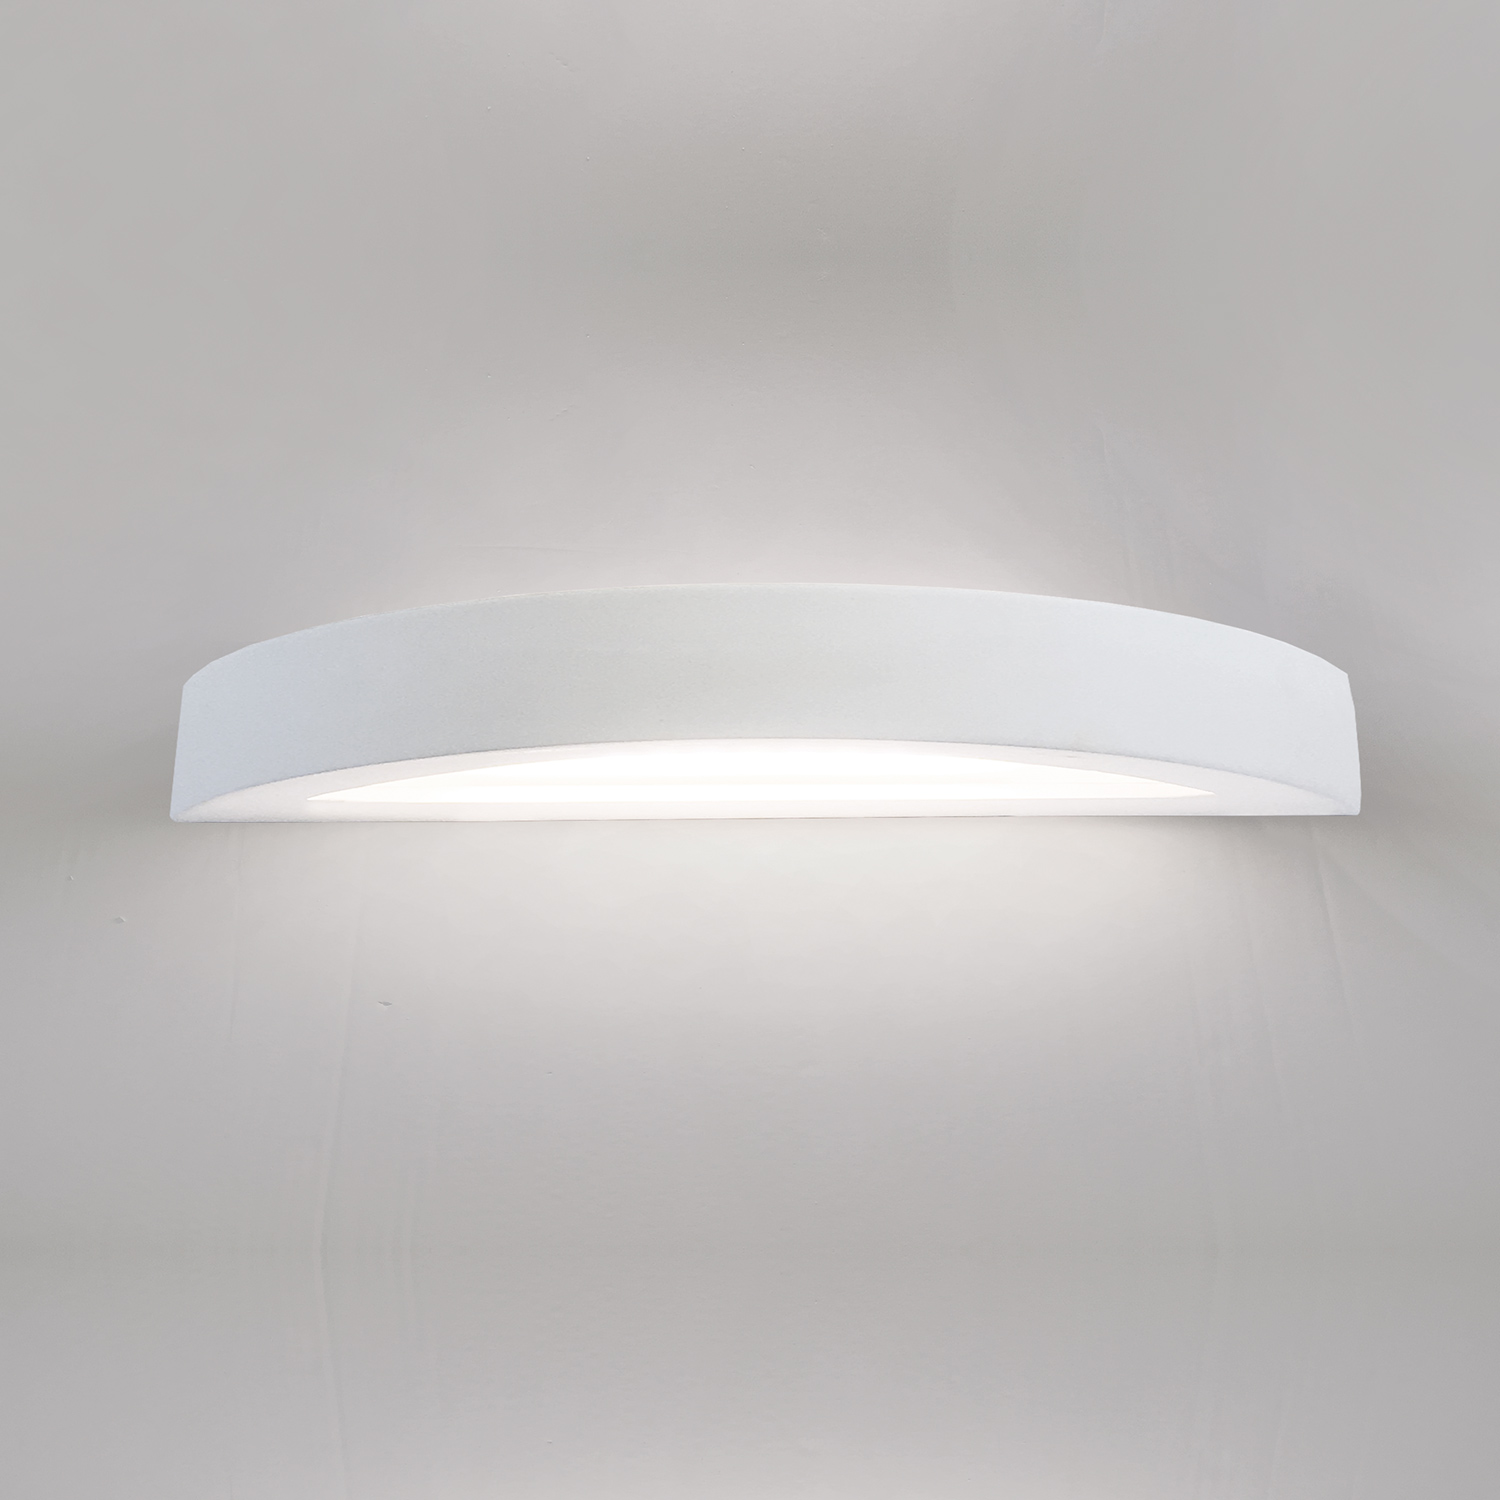 Aplique pared yeso 420mm x 60mm para LED IN090